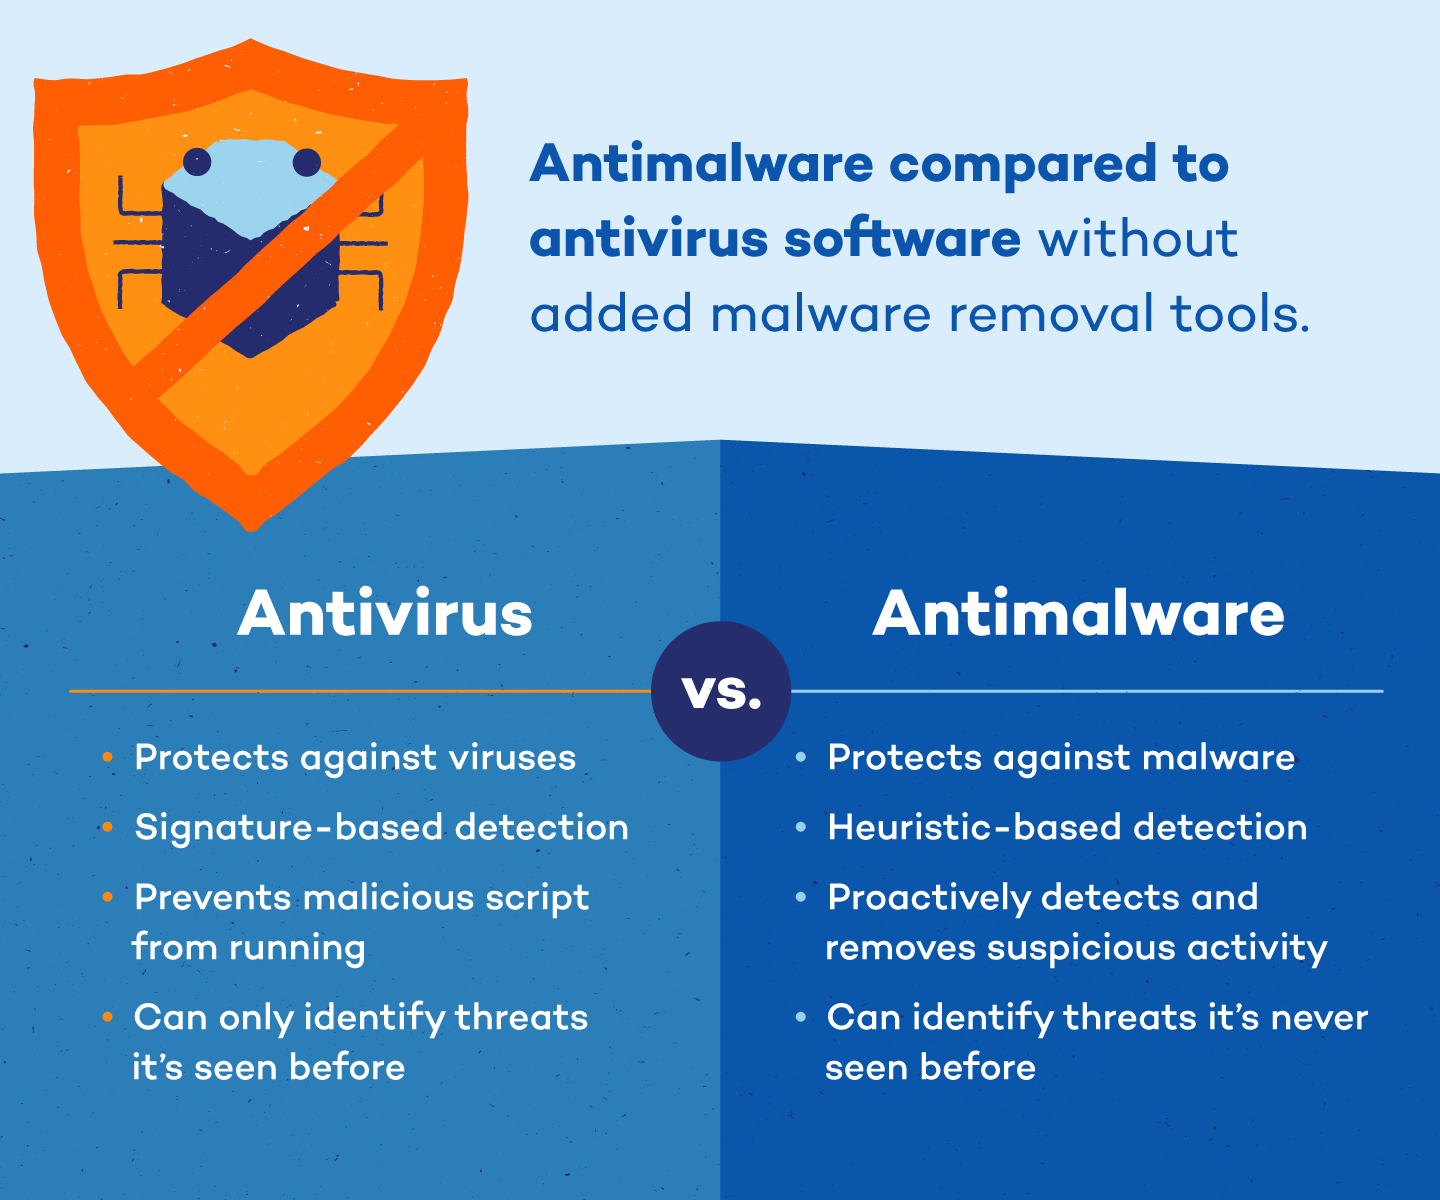 Antivirus/antimalware software: Regularly update and use reputable antivirus or antimalware software to scan for and remove any malware or unwanted programs, including blacklist_game.exe.
Security awareness and education: Educate users about the risks associated with unauthorized or suspicious programs, and encourage them to avoid downloading or executing such files, including blacklist_game.exe.